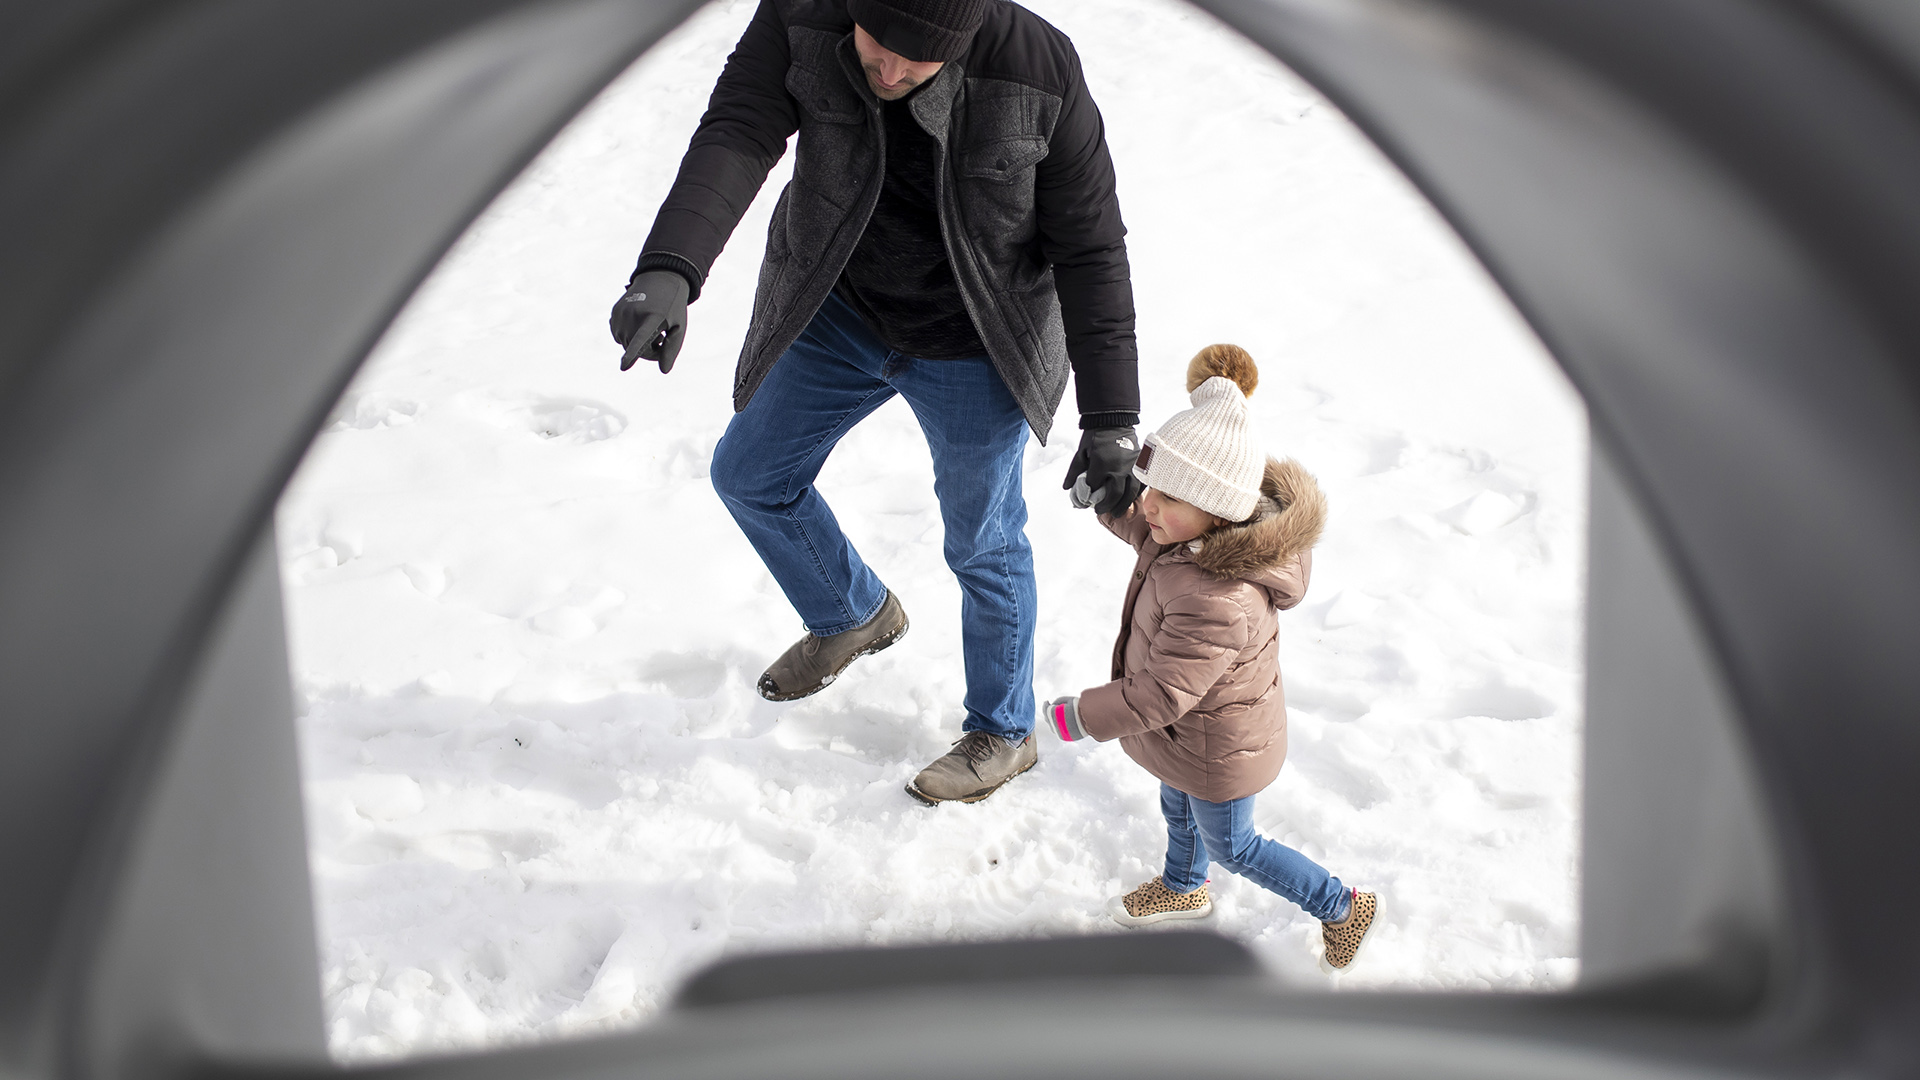 Mario Gonzalez holds the hand of his daughter as the walk across snowy ground as seen through playground equipment.